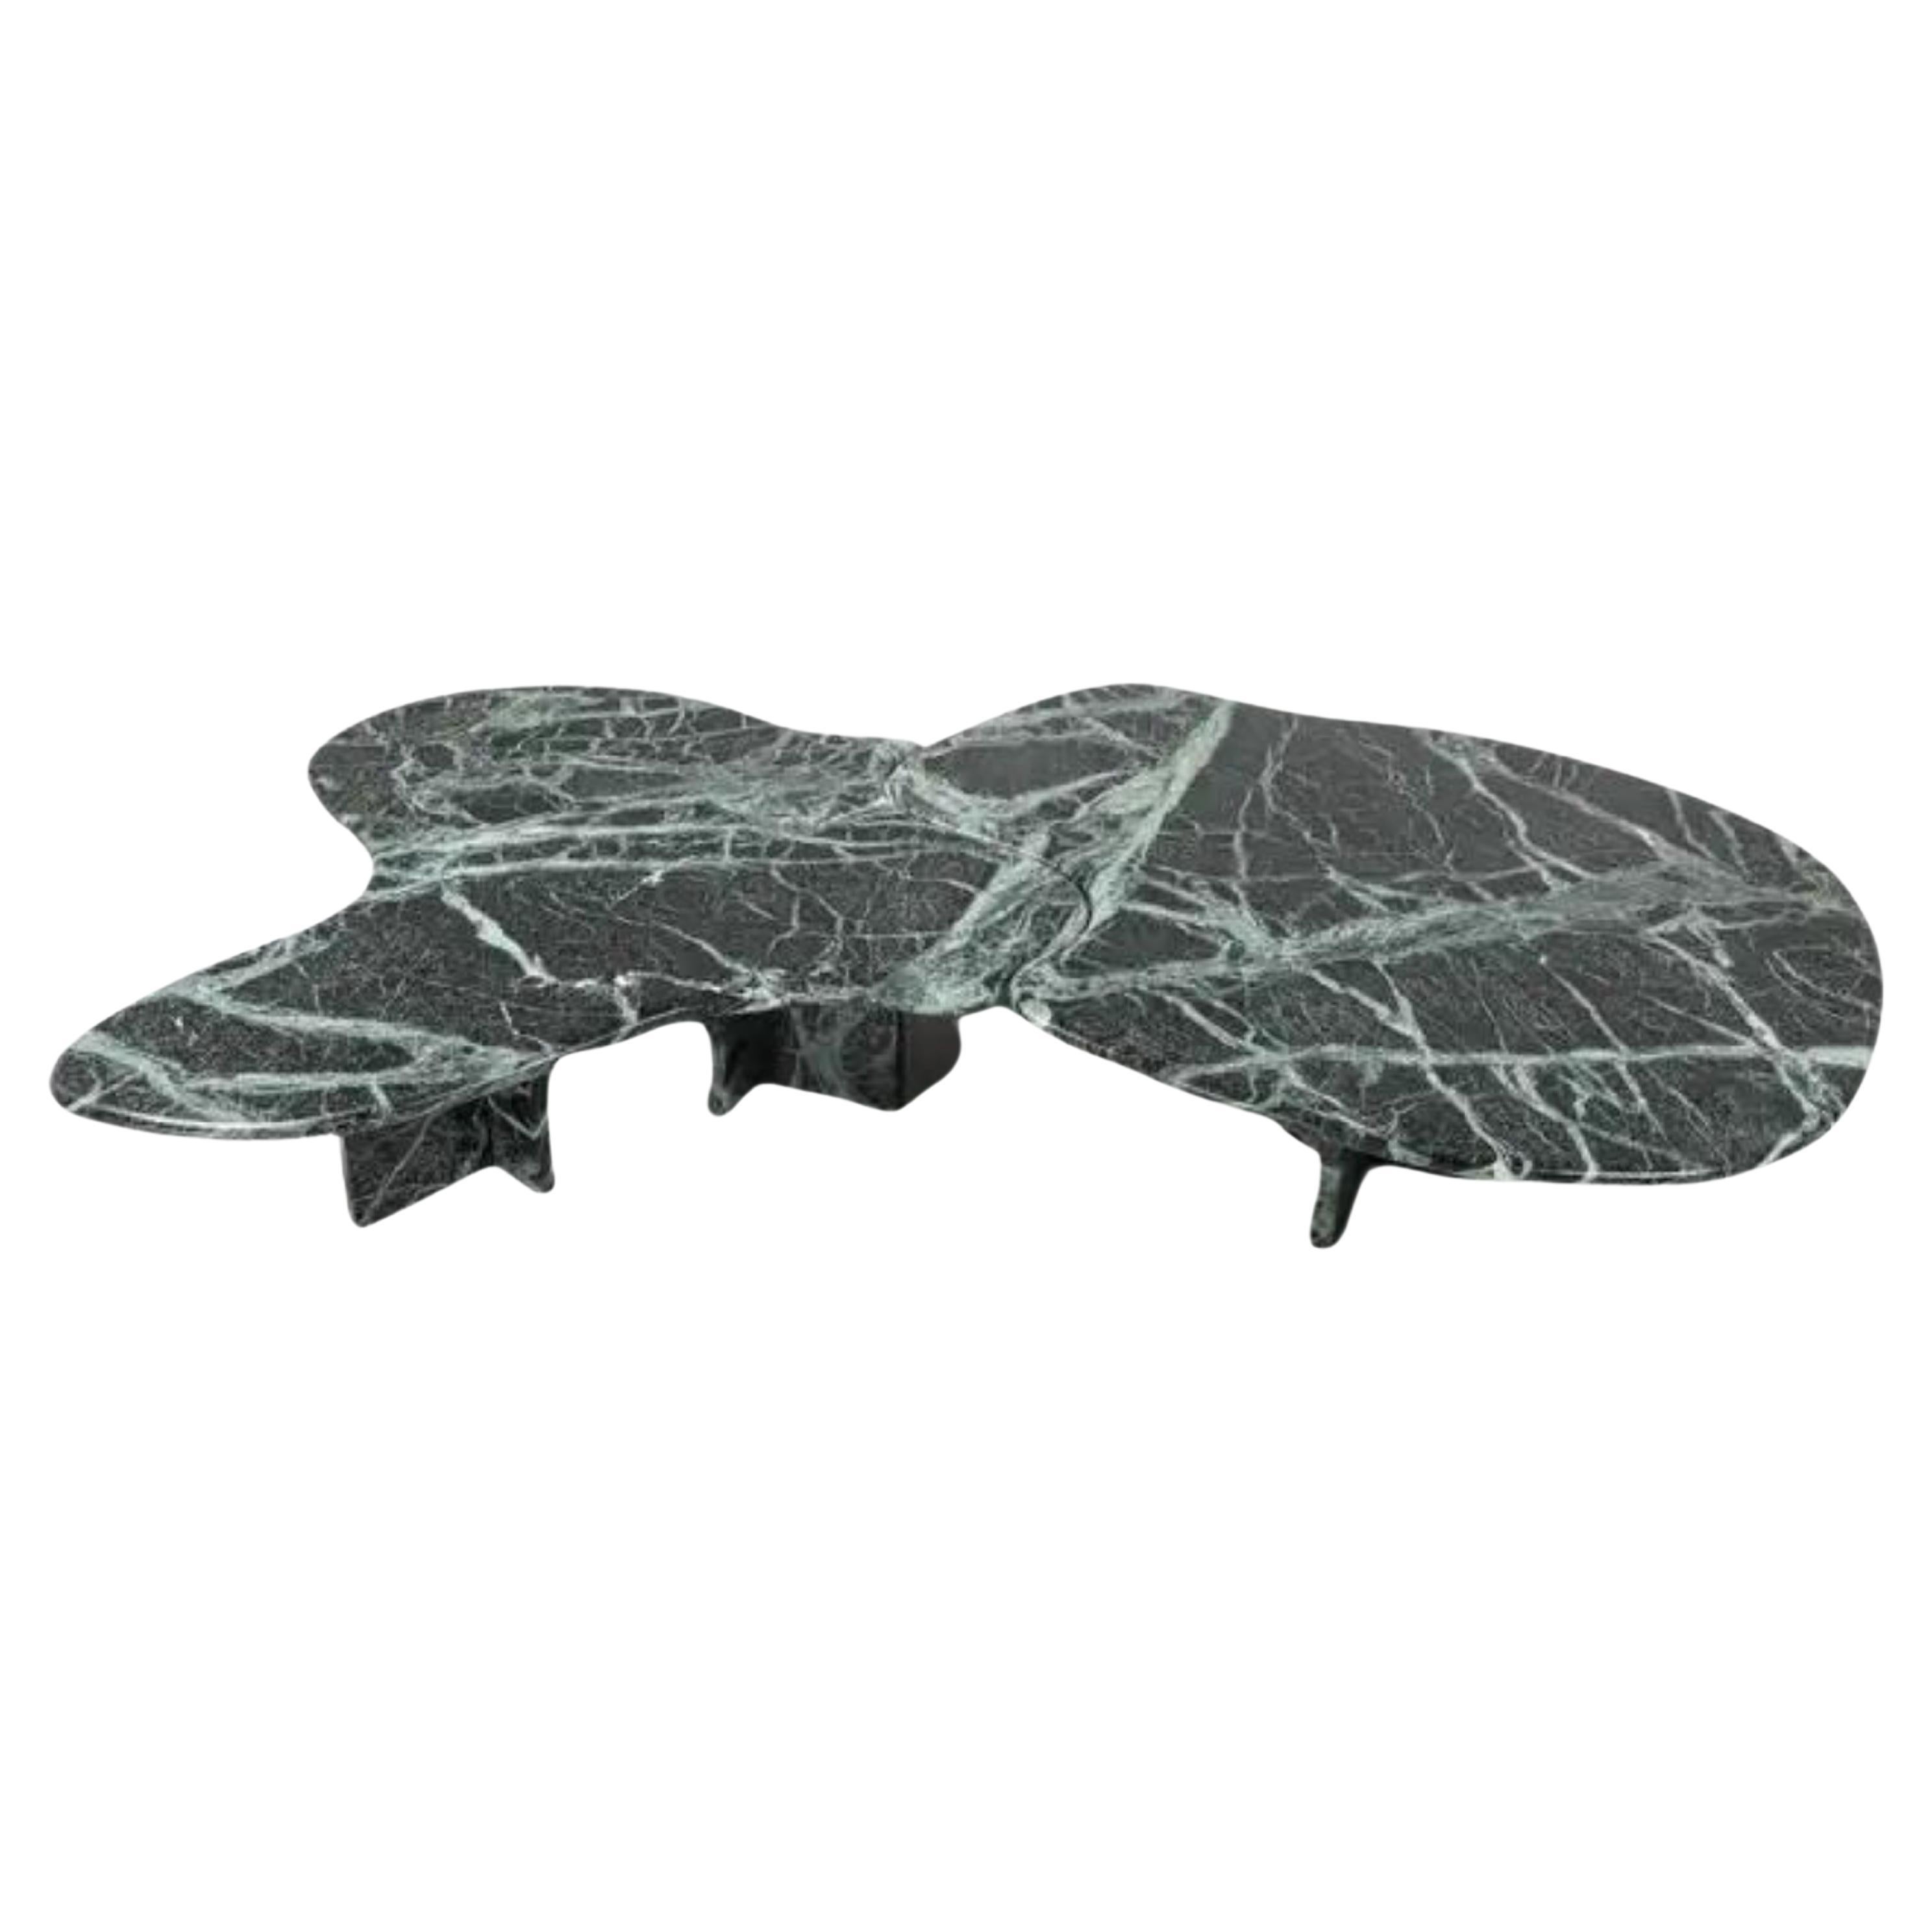 ORGANIC GREEN MARBLE COFFEE TABLES - Set of two For Sale